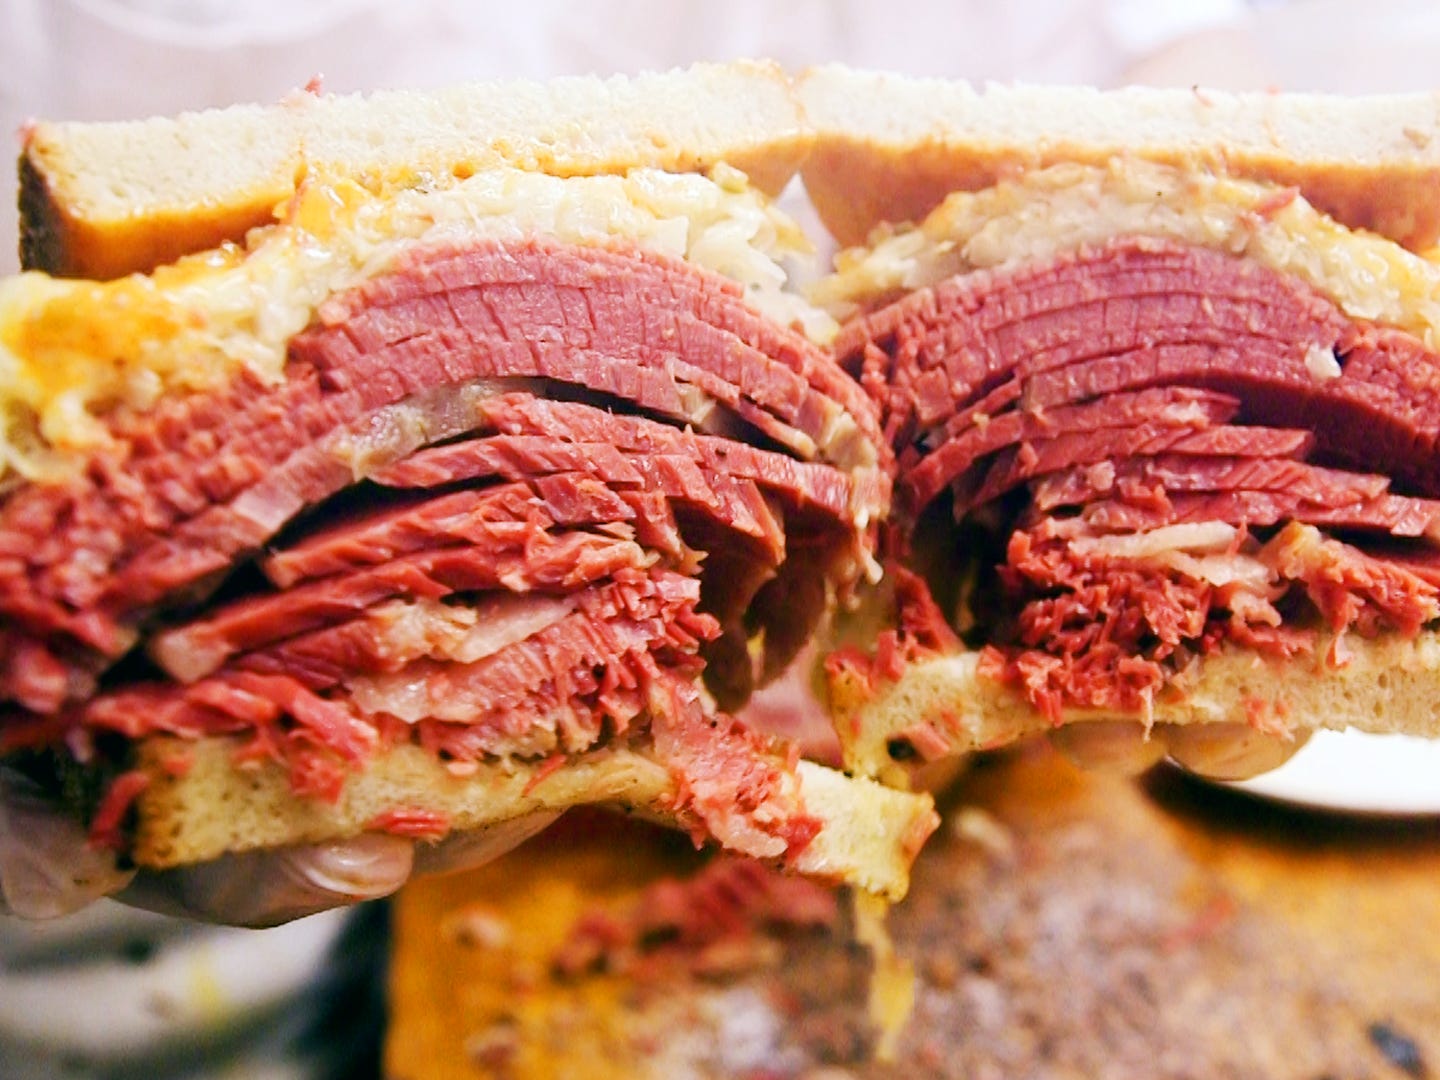 <p>There's nothing more NYC than a pastrami sandwich from Katz's Delicatessen in the Lower East Side of Manhattan. The famous deli, which opened its doors in 1888, is known as one of the city's oldest delis, and it's arguably the <a href="https://www.insider.com/most-famous-deli-in-every-state-2019-7" rel="">most famous deli in the entire country</a>. </p><p>The restaurant has been frequented by scores of celebrities and politicians over the years and was even featured in the classic 1989 romantic comedy "When Harry Met Sally..." — Katz's is where the iconic <a href="https://www.youtube.com/watch?v=lNEX0fbGePg" rel="nofollow noopener">"I'll have what she's having" scene</a> took place.</p>